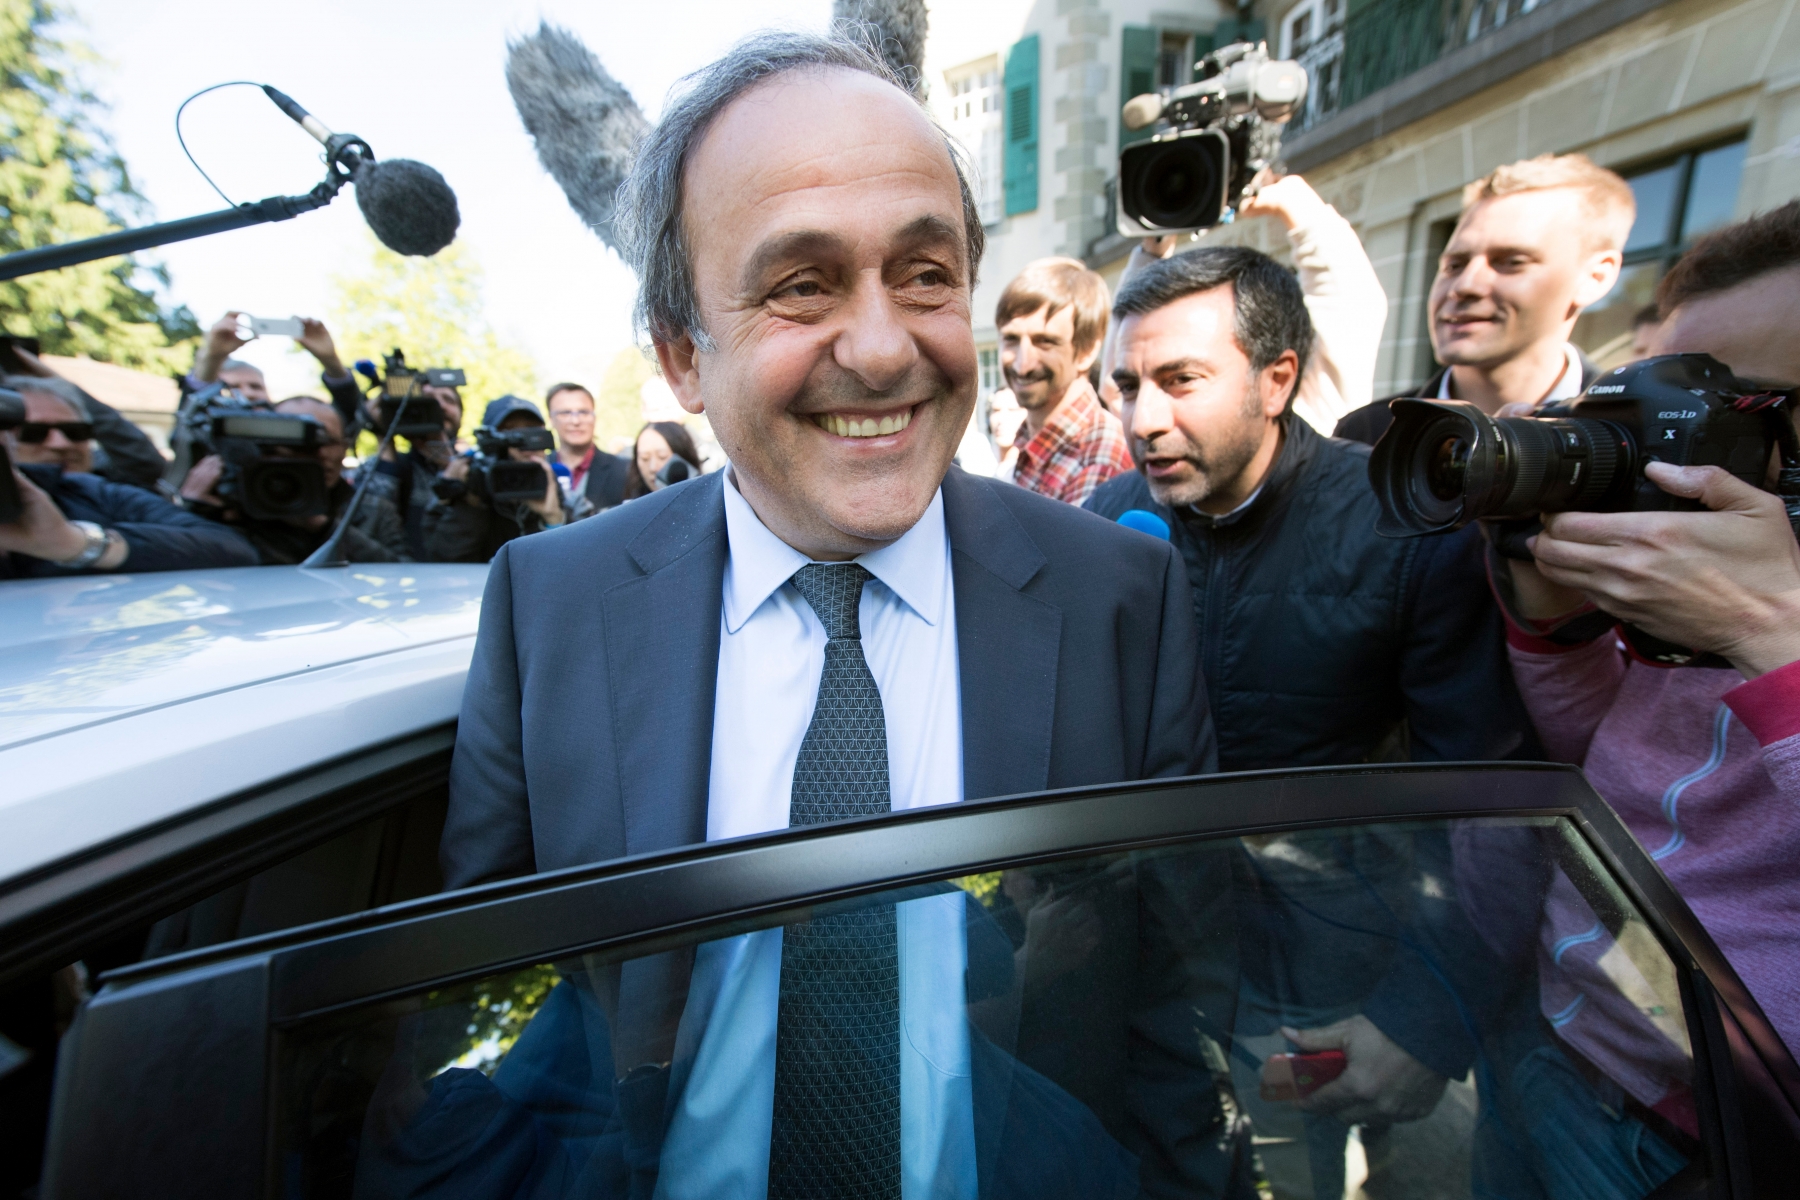 UEFA President Michel Platini of France leaves the international Court of Arbitration for Sport, CAS, surrounded by the media after a hearing in Lausanne, Switzerland, Friday, April 29, 2016. European football chief Michel Platini appealed against a six-year FIFA ban from all football-related activity. Platini, the UEFA president, was suspended by FIFA's ethics committee for receiving a two million Swiss francs ($2 million) payment in 2011 from Blatter, who was then the FIFA president. (KEYSTONE/Laurent Gillieron) SWITZERLAND CAS SOCCER PLATINI